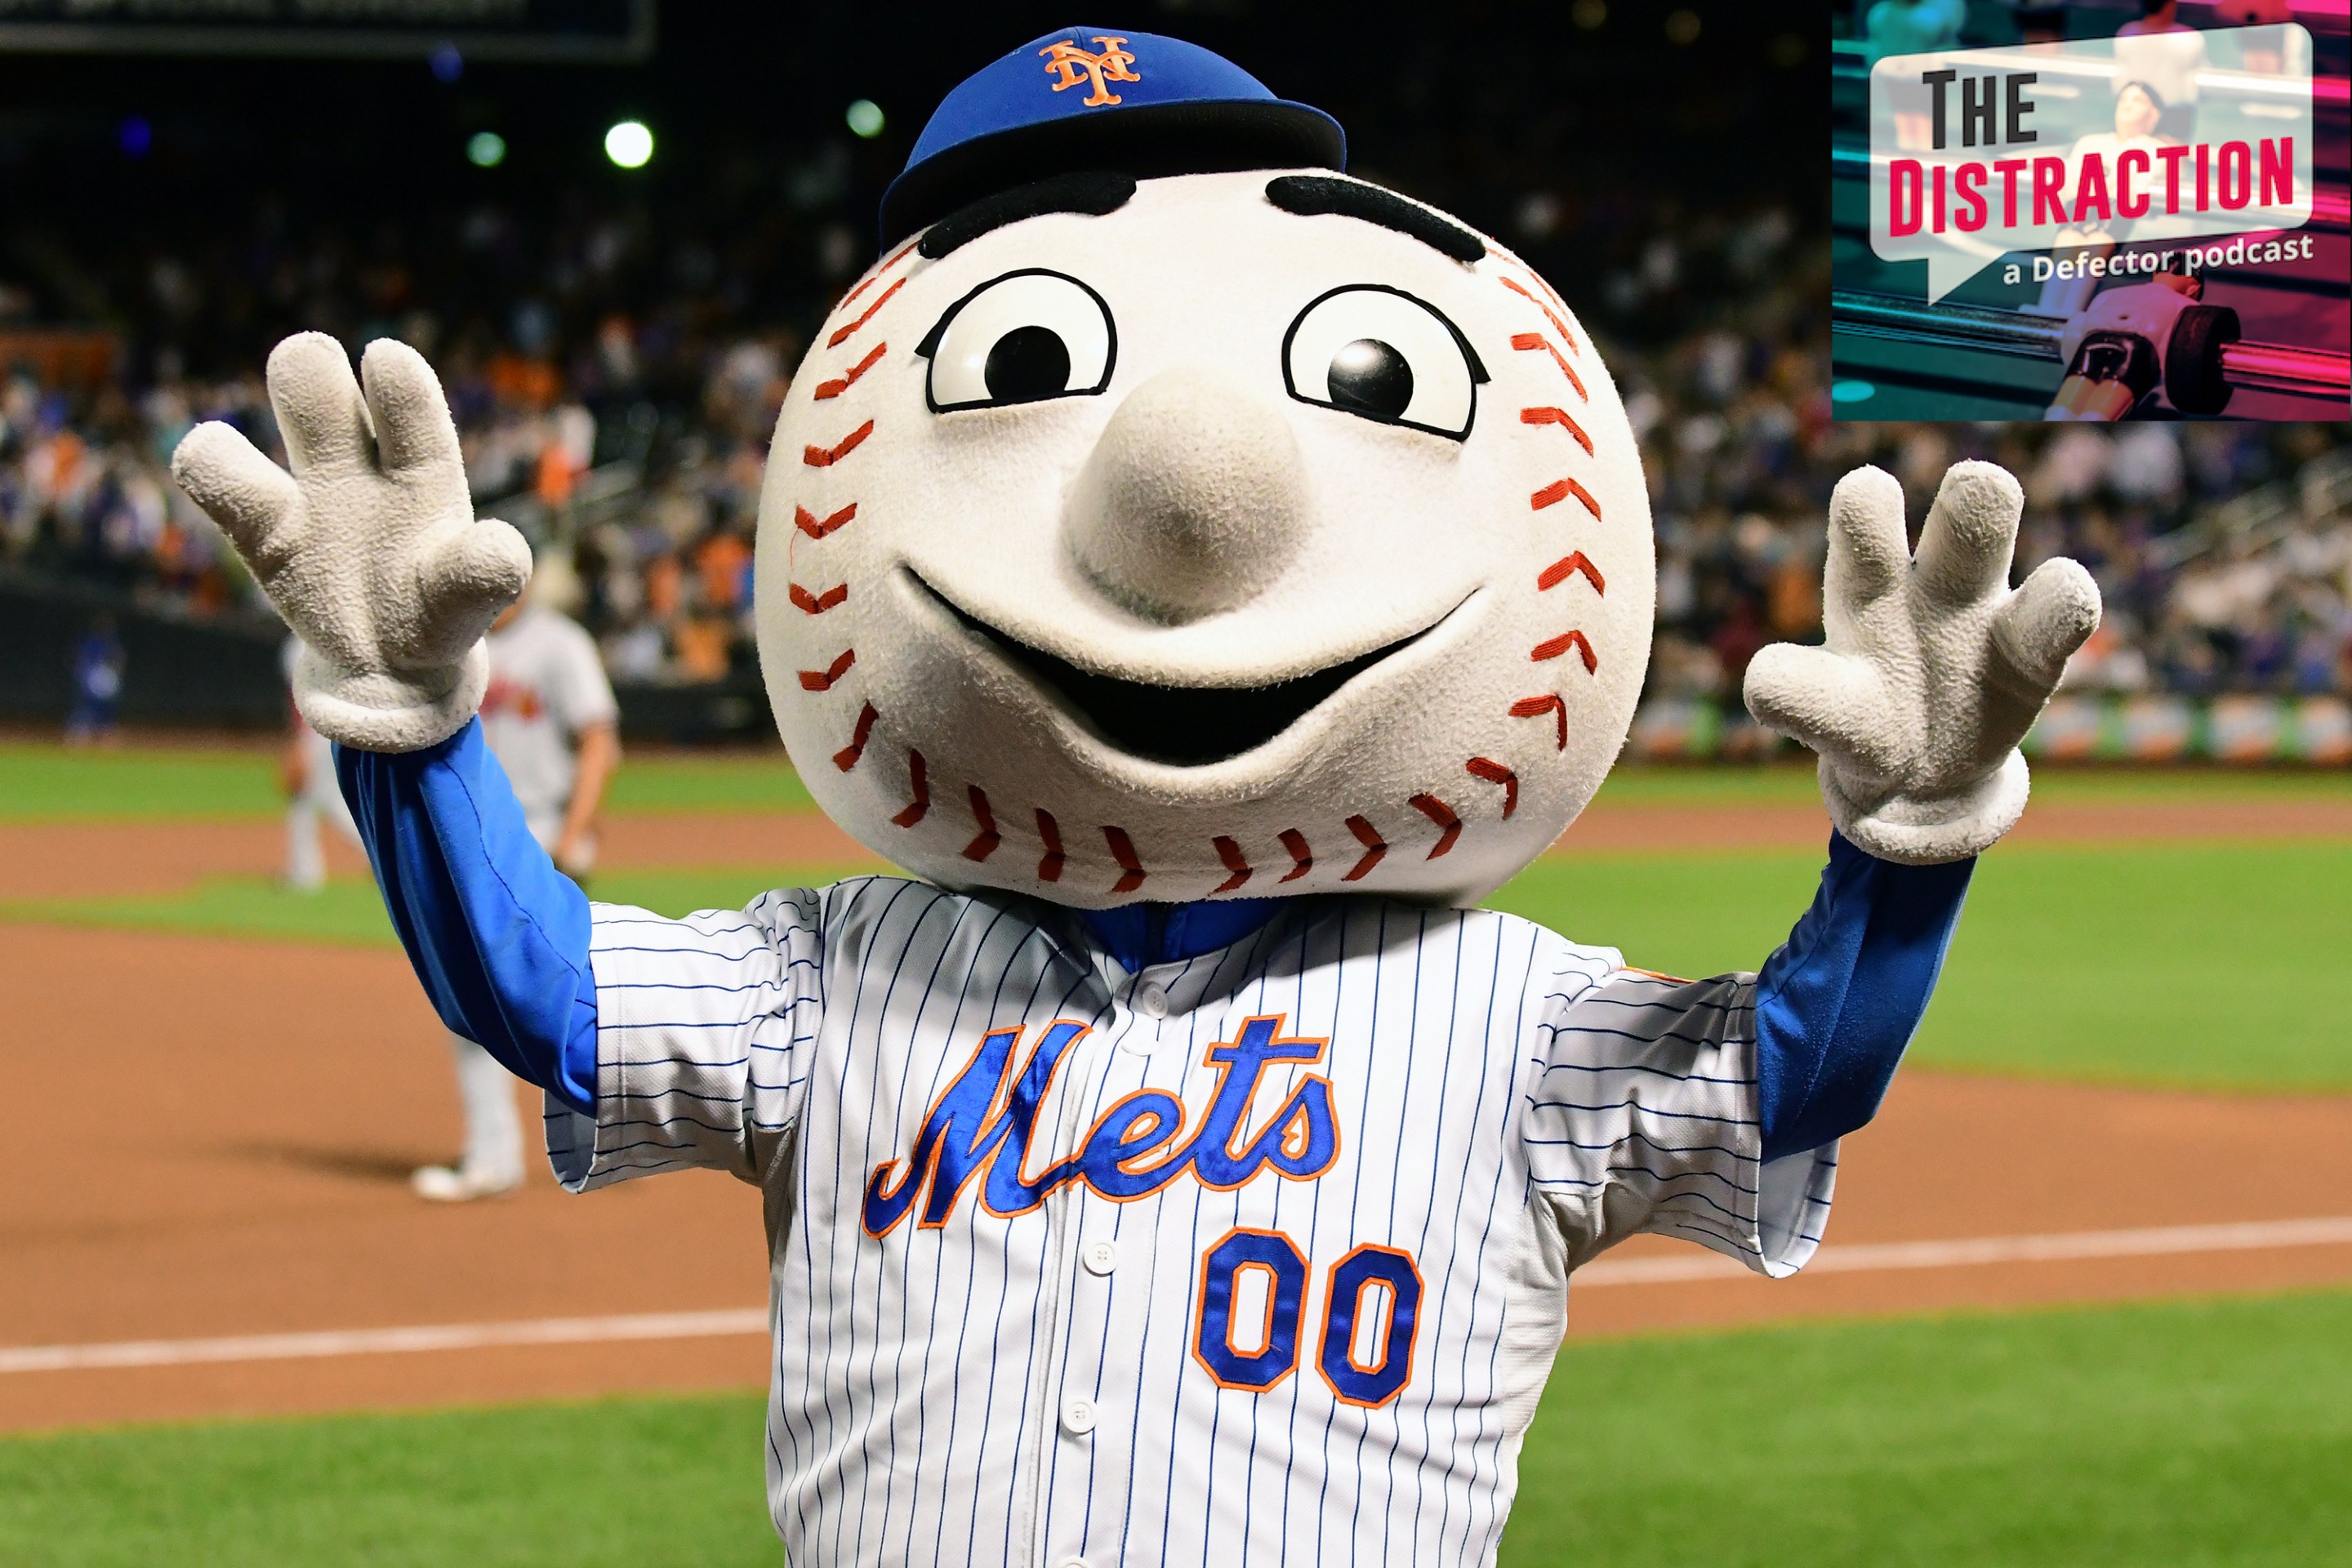 Mr. Met striking a benignly unsettling Mr. Met-style pose on the field during a Mets game.